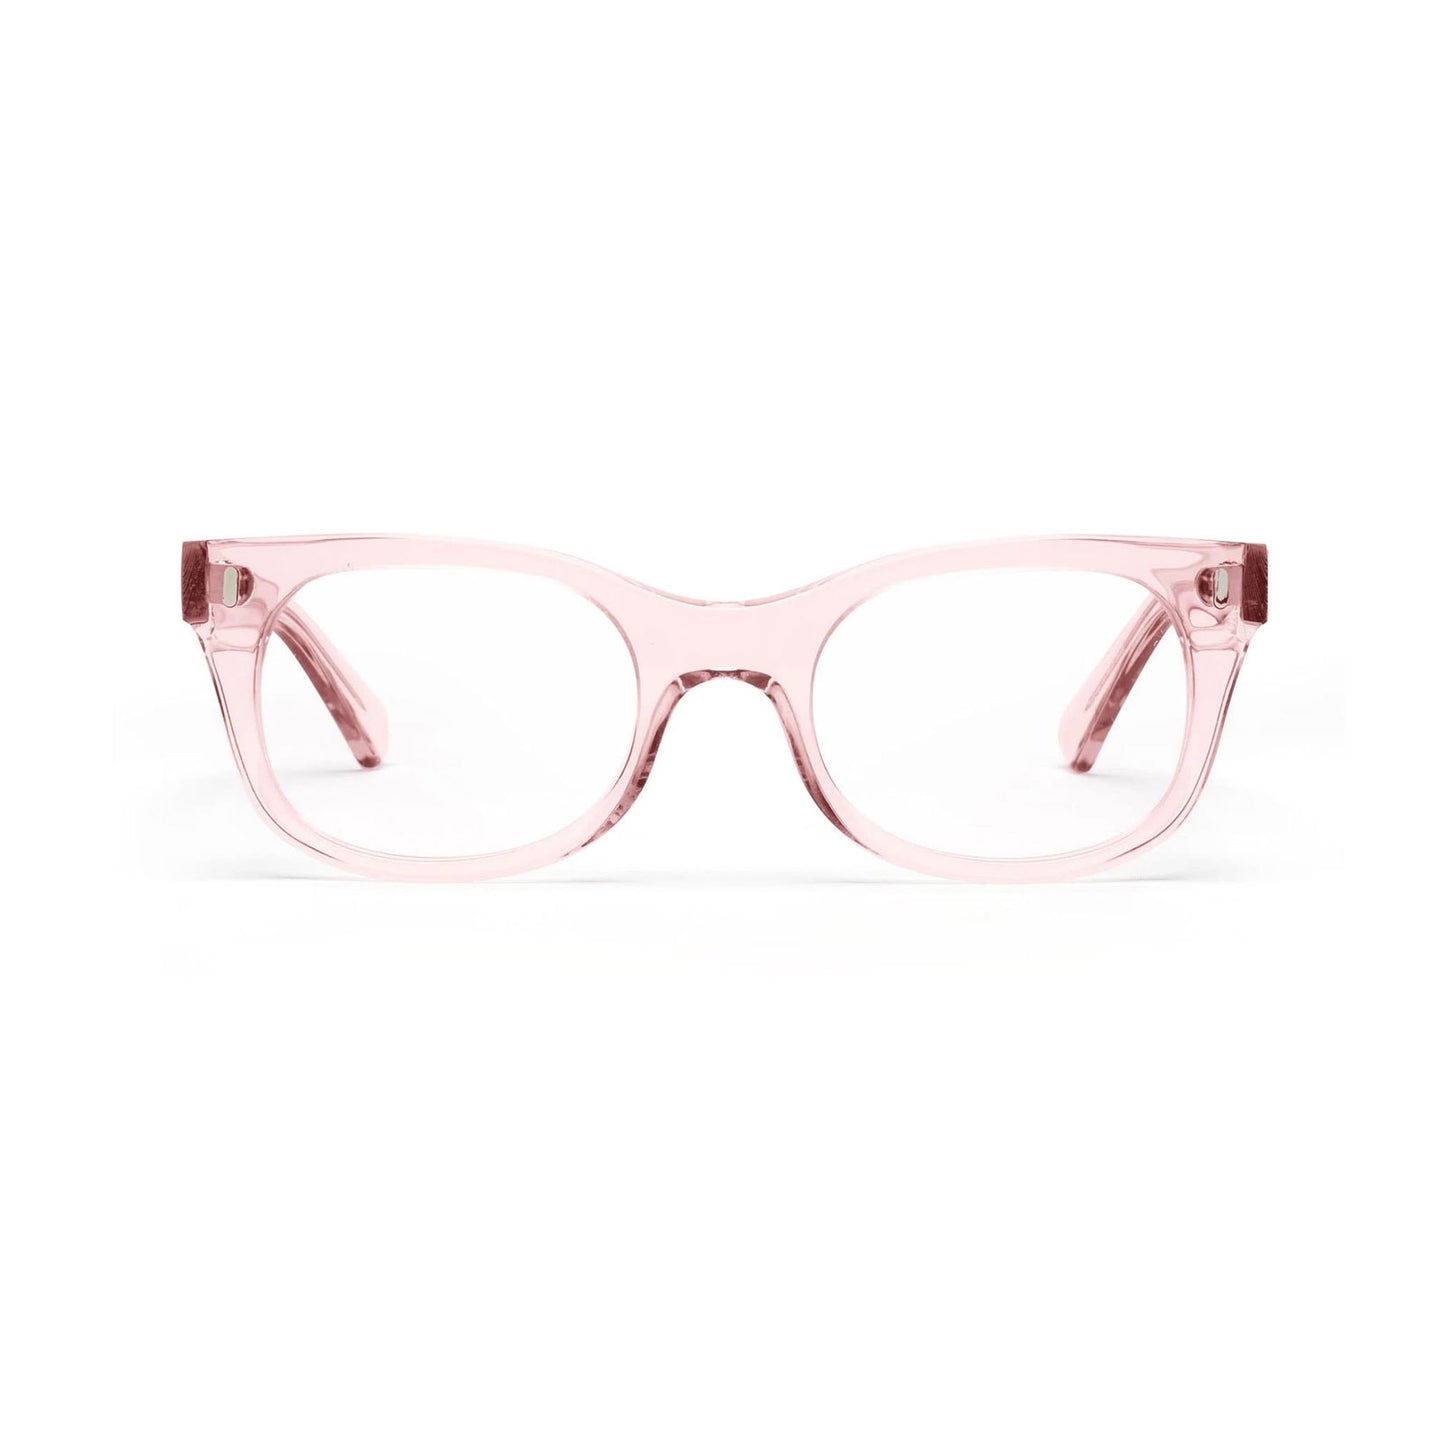 Caddis Reading Glasses, Bixby, Clear Pink